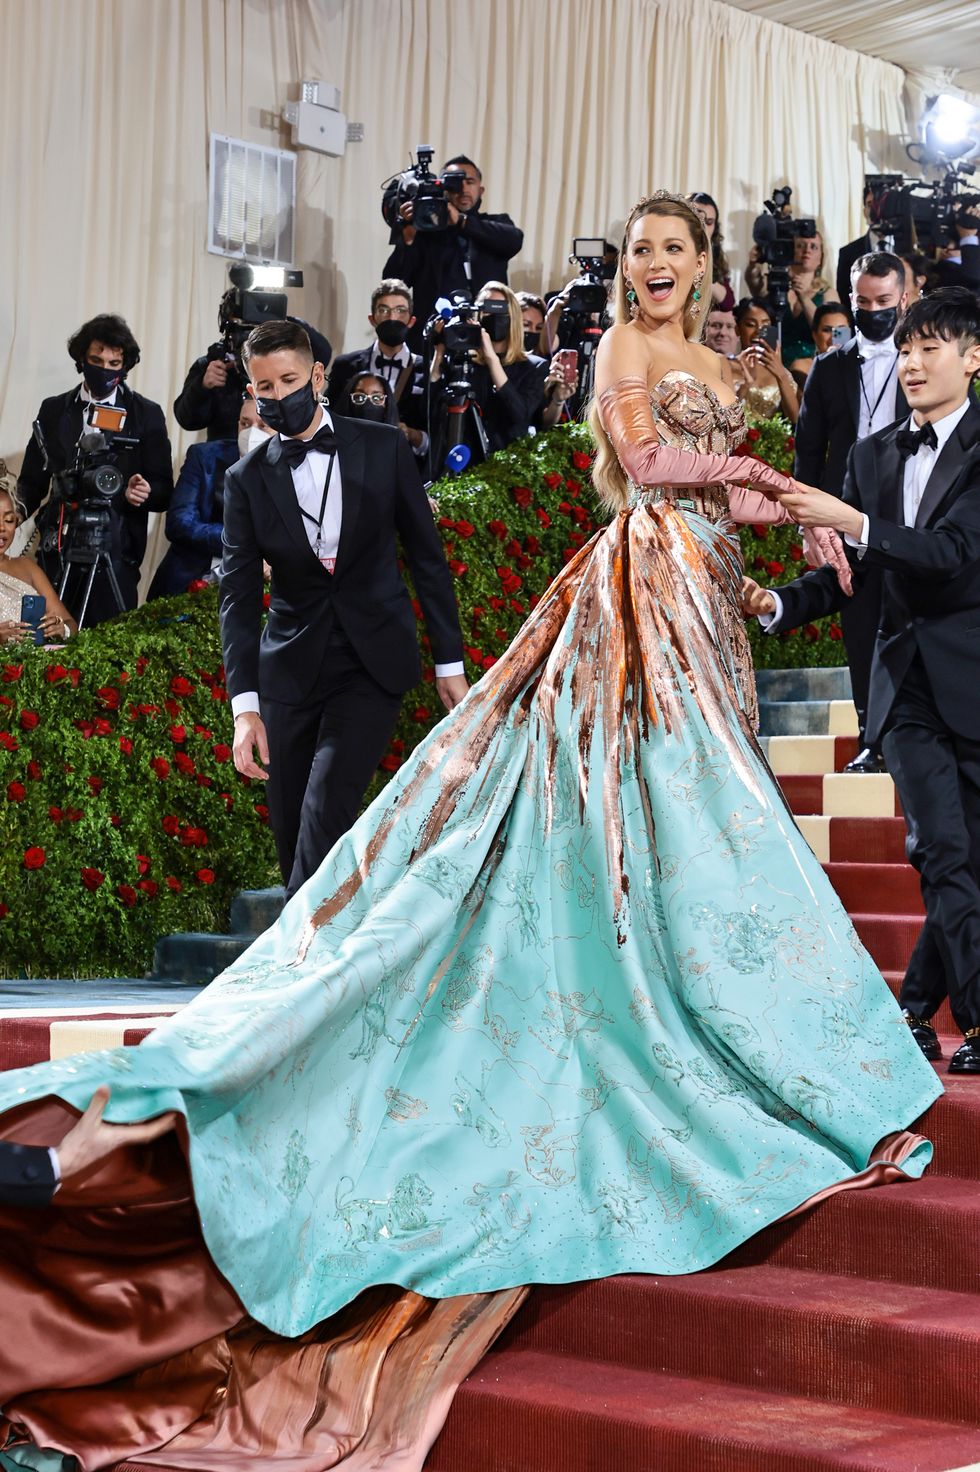 Blake Lively Has Another Iconic Hair Moment on the Met Gala 2022 Red Carpet